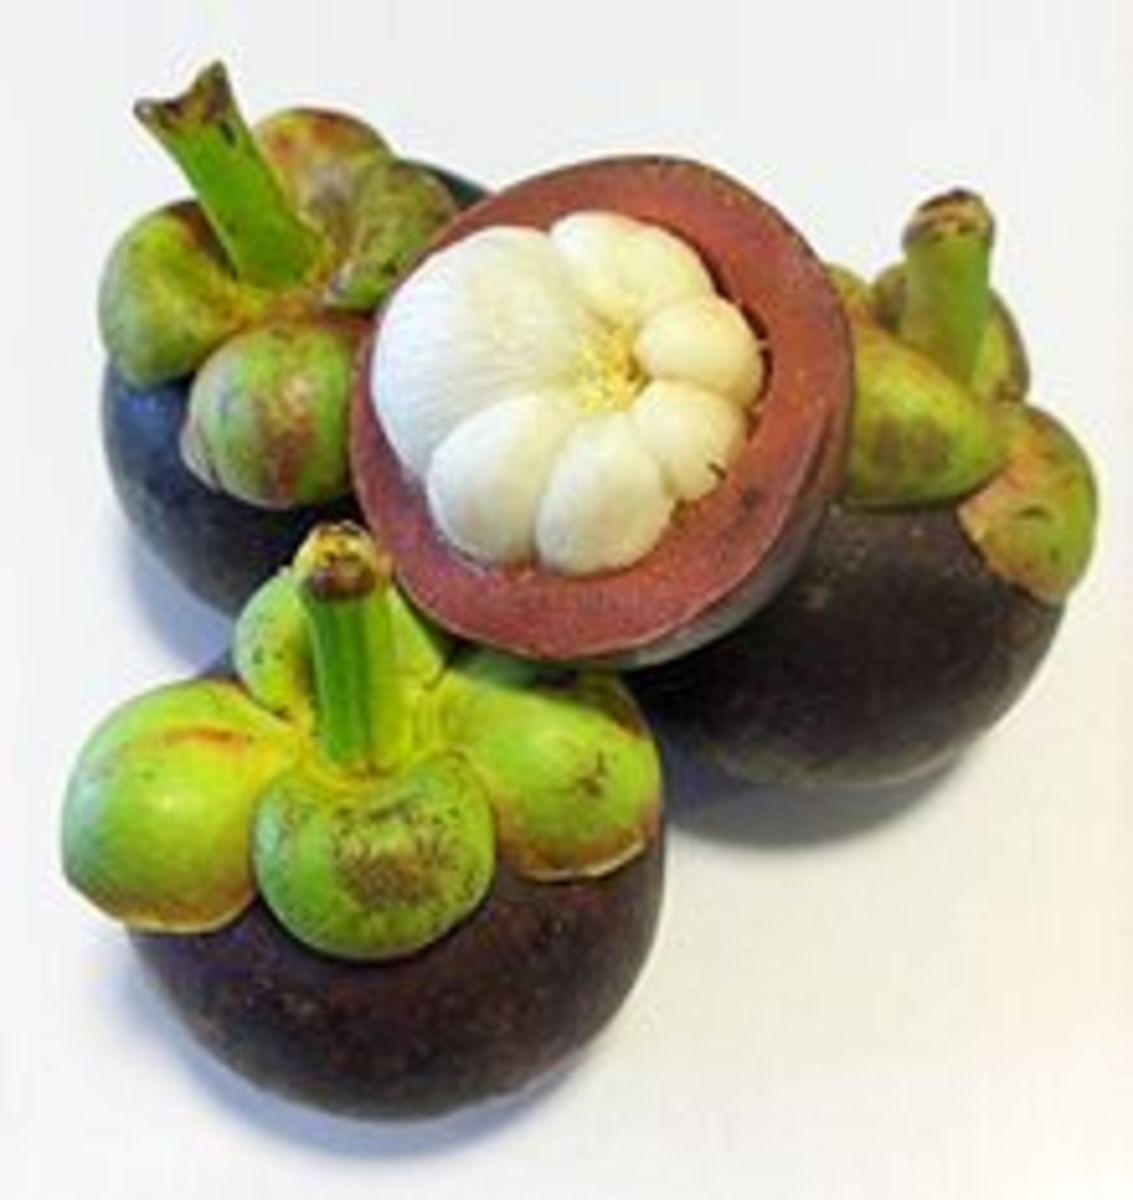 ten-of-the-worlds-most-exotic-fruits-how-many-have-you-seen-or-tasted